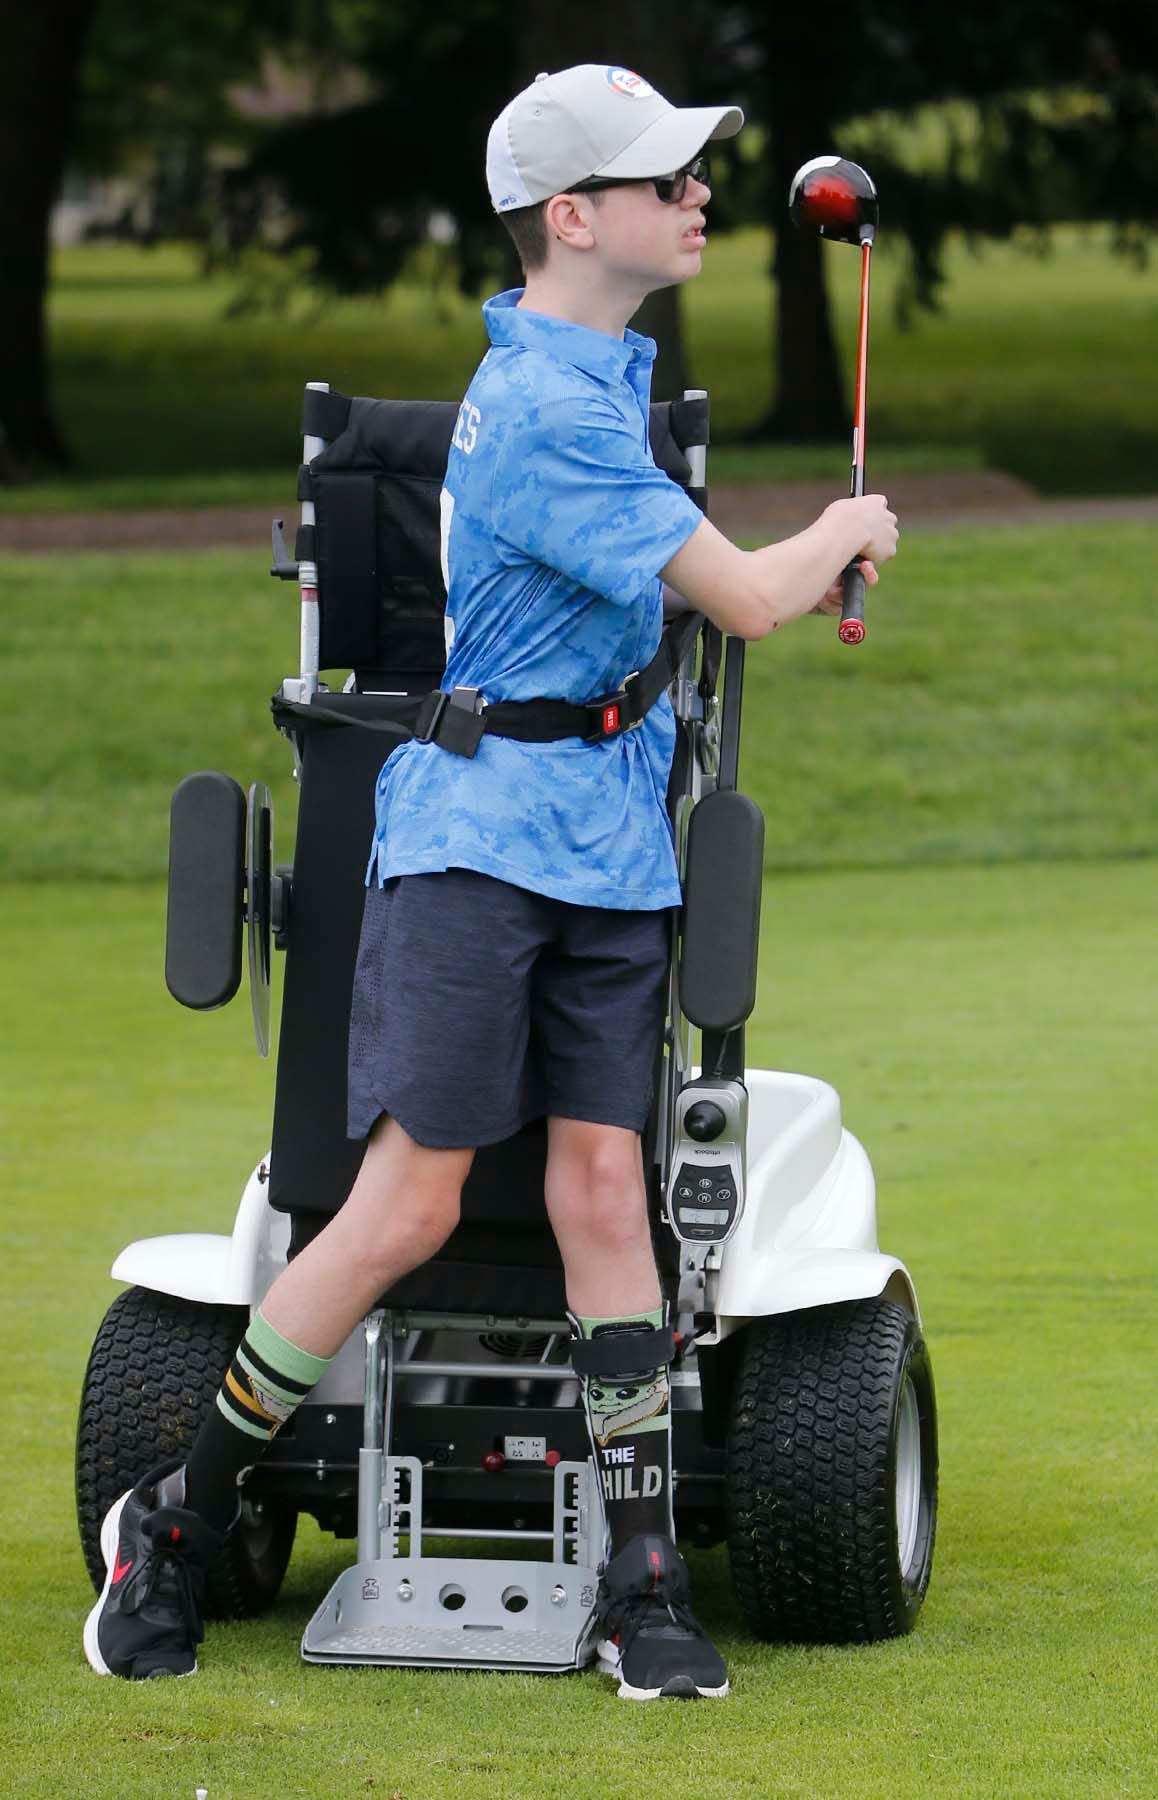 Vinny Mercurio, 13, of North Royalton, watches his ball after he swings on the driving range at the Firestone Country Club, Wednesday, June 9, 2021 in Akron, Ohio. [Karen Schiely / Akron Beacon Journal]